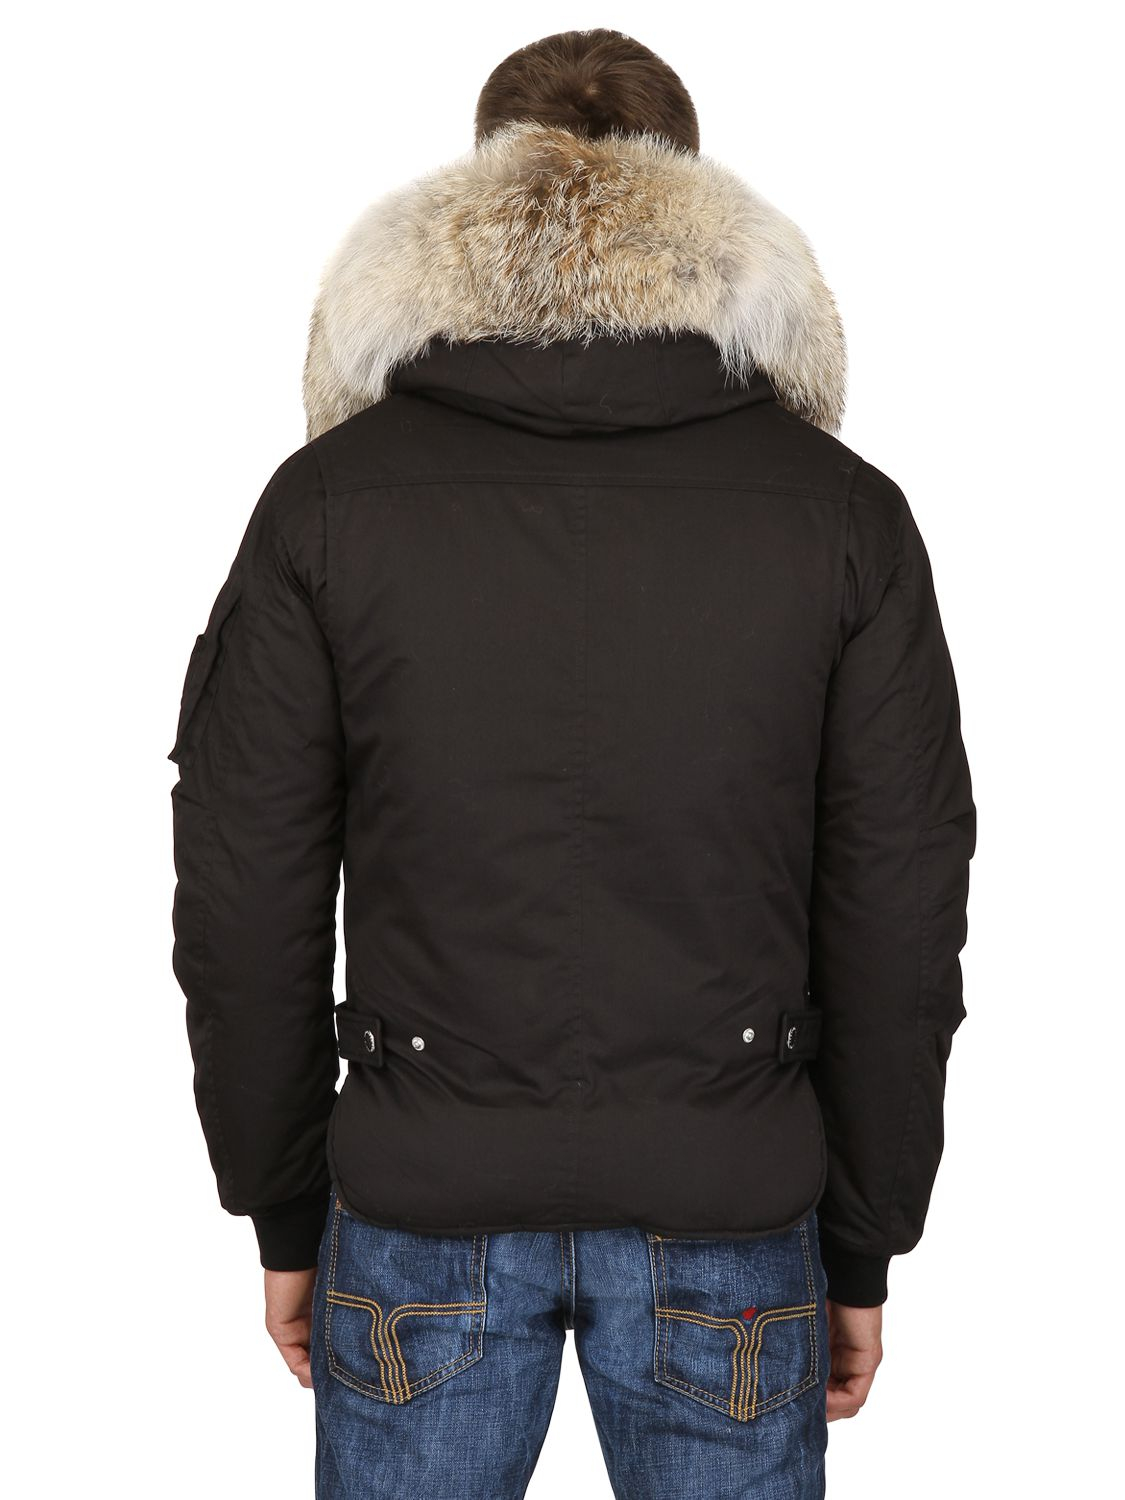 Dsquared² Nylon Canvas Down Jacket W Fur Collar in Black for Men | Lyst